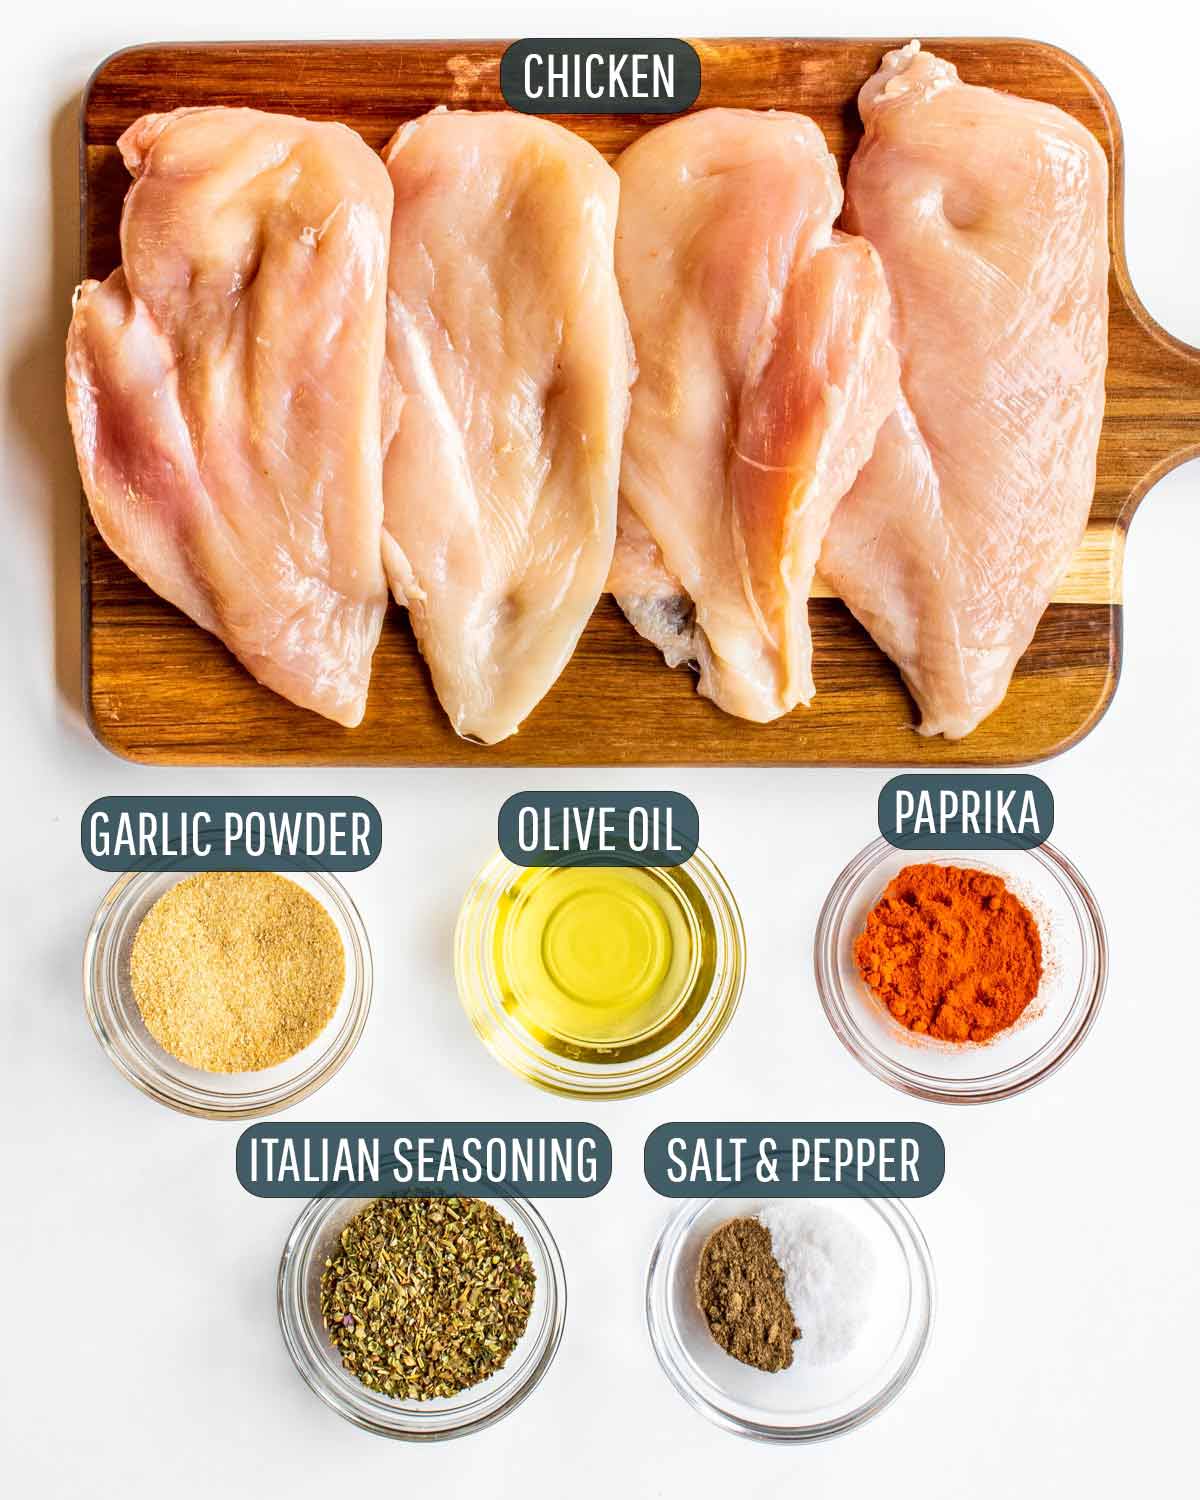 ingredients needed to season chicken breasts for making creamy herb chicken.